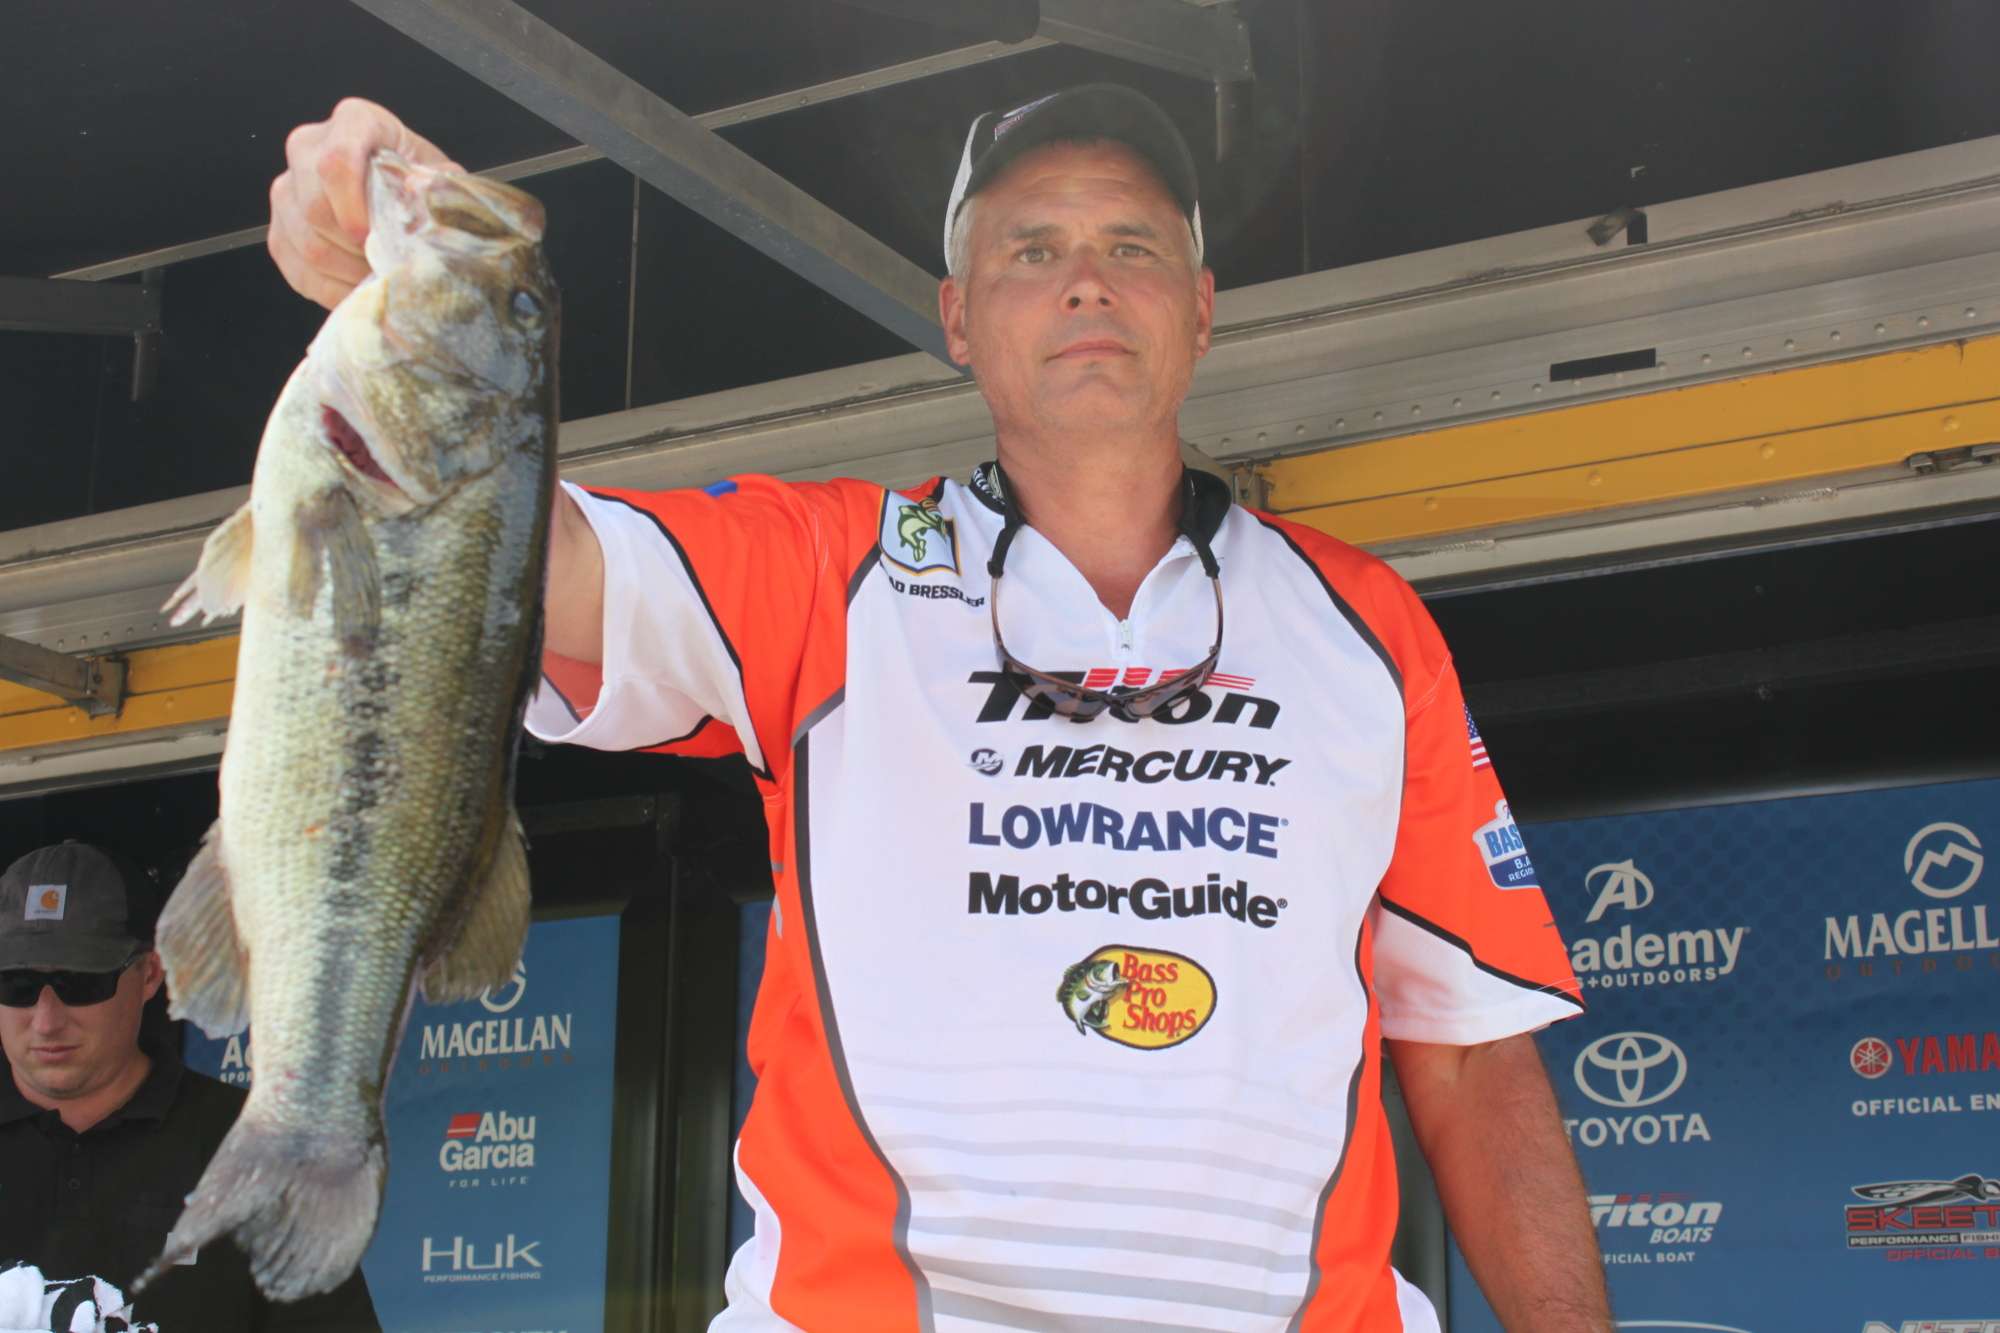 Brad Bressler of Team Pennsylvania has the Big Bass of the Tournament so far with this 5-5 toad he boated Thursday. The boater with the heaviest bass this week will win $500. The non-boater with big bass earns $250.